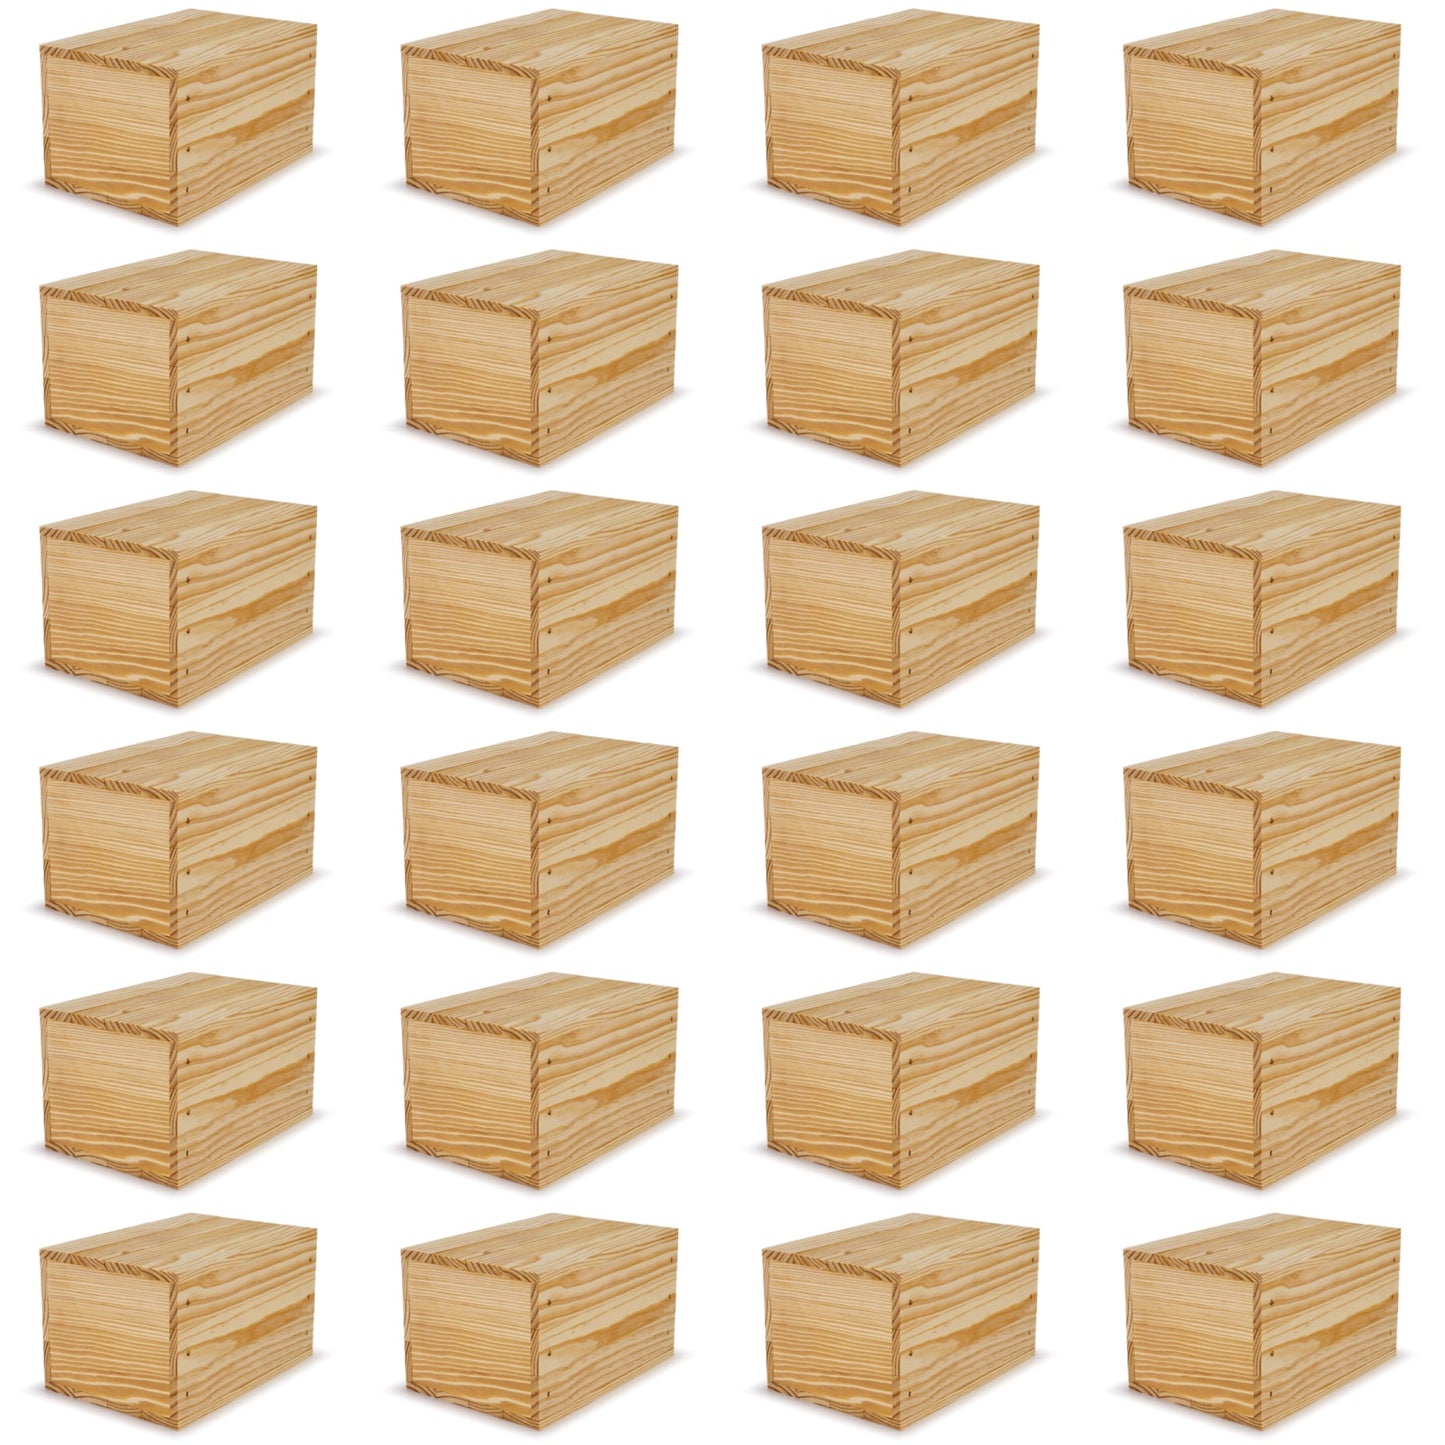 24 Small wooden crates with lid 9x6.25x5.25